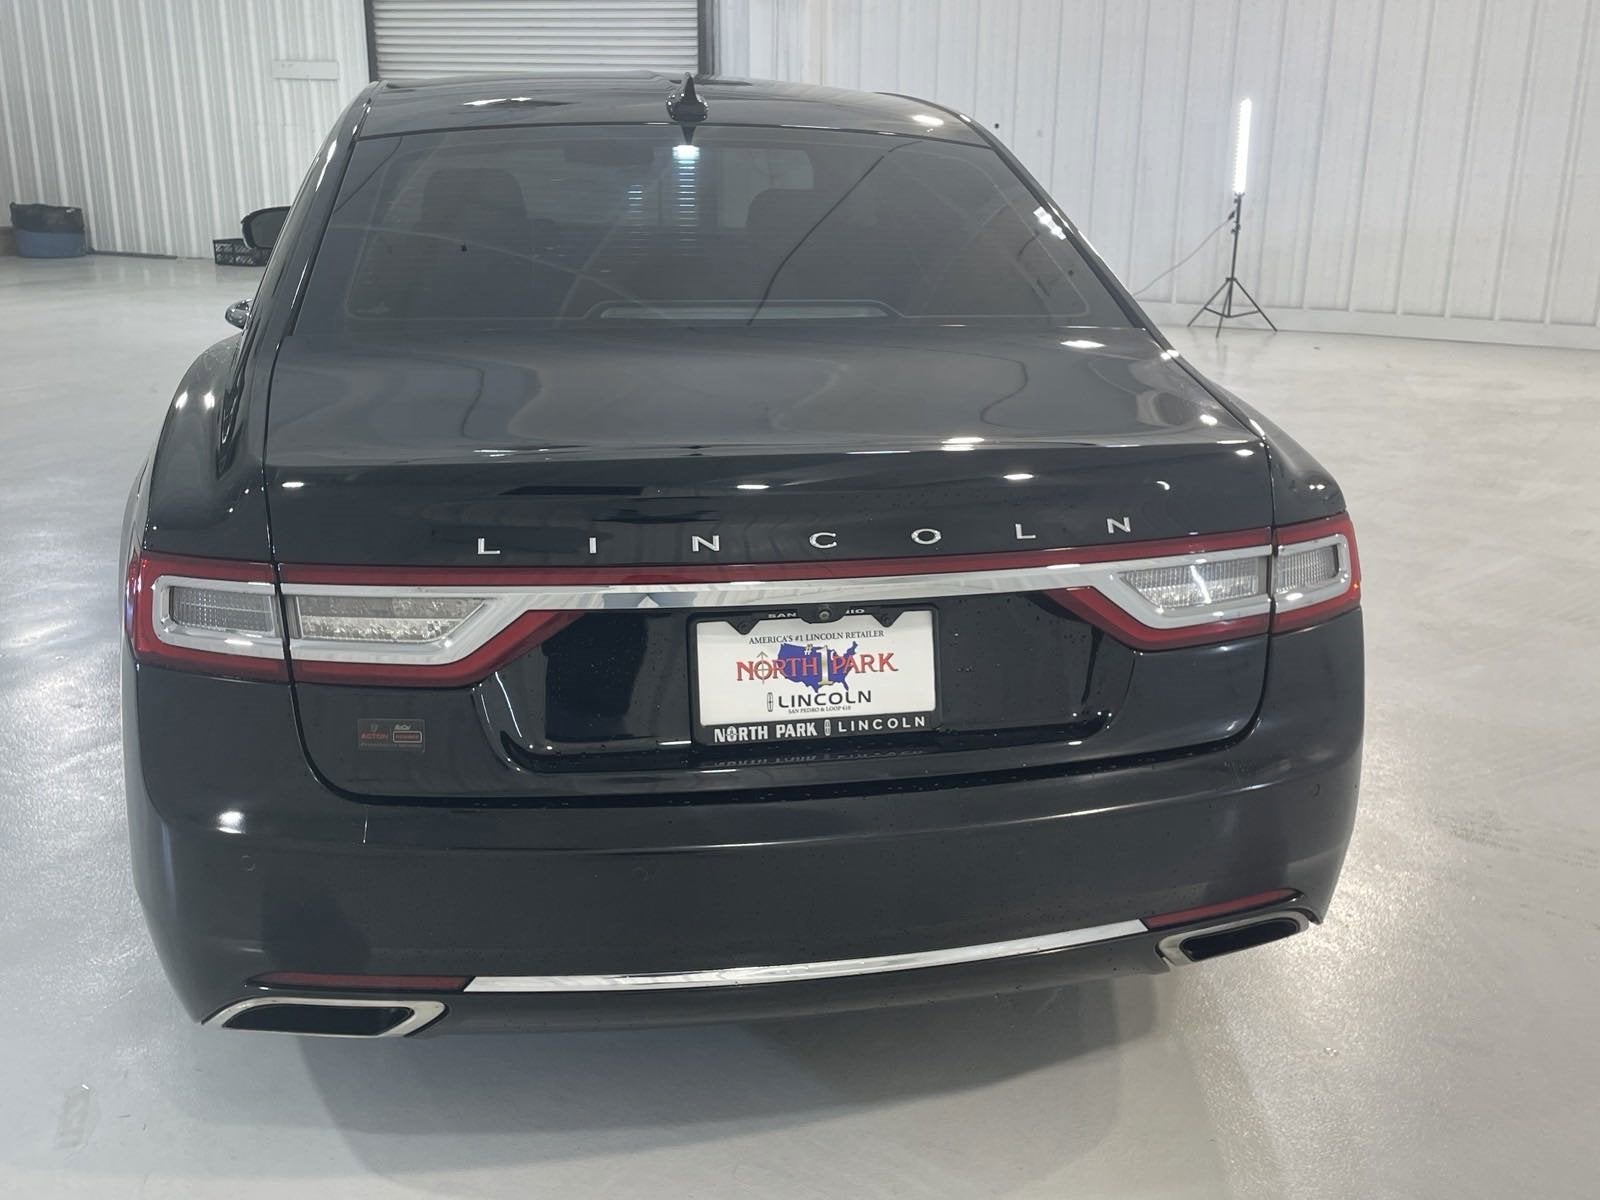 2019 Lincoln Continental Livery